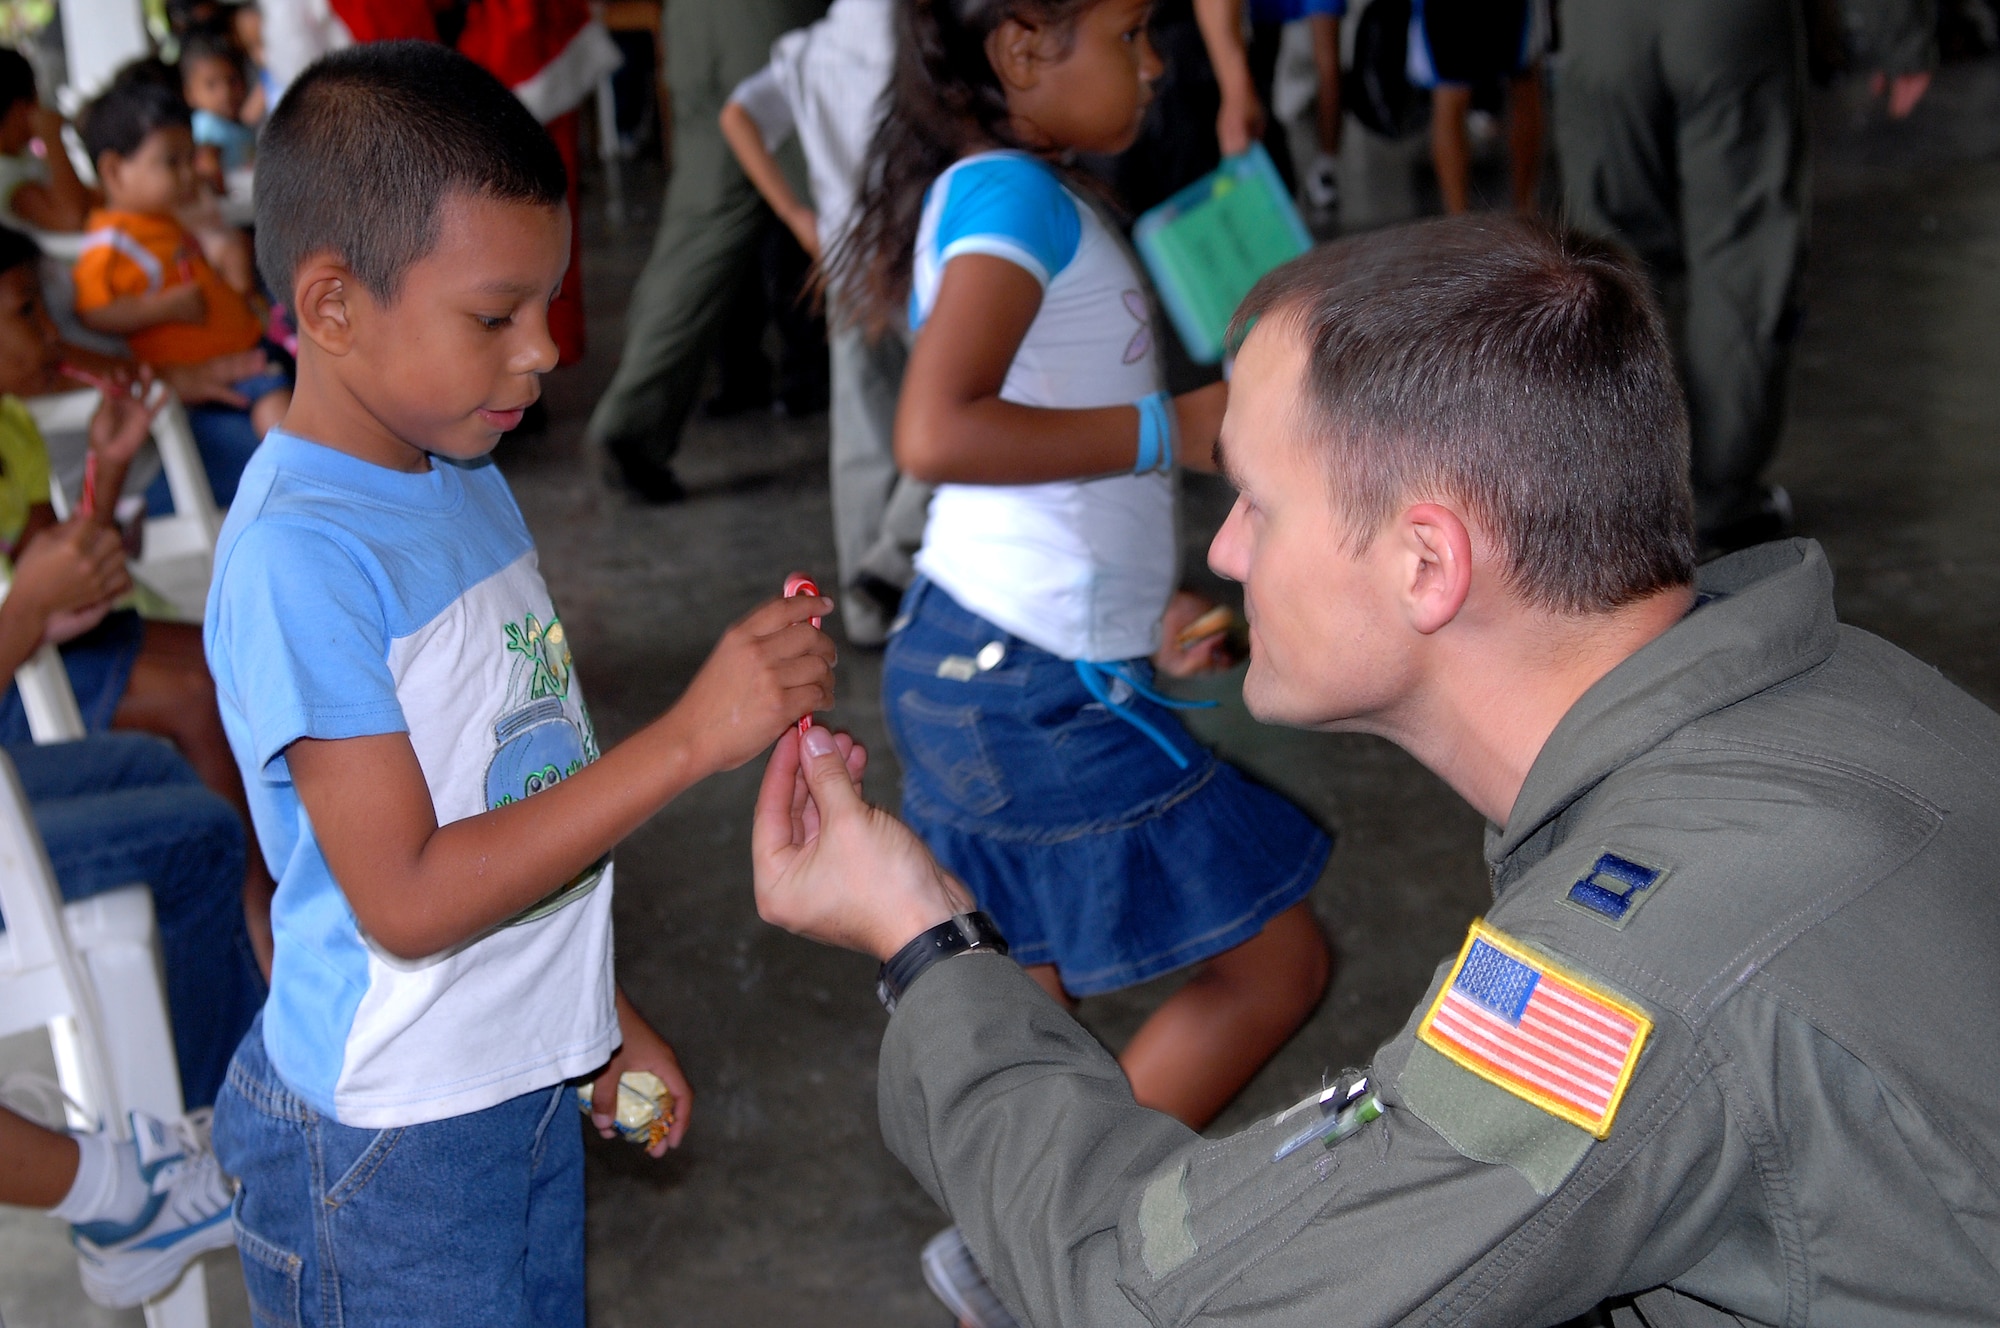 Capt. Patrick Dube, an aircraft commander with the 9th Special Operations Squadron, hands a Honduran orphan a candycane at Aldea Infantil S.O.S Orphanage in La Ceiba, Honduras during Operation Christmas Wish Dec. 13. Captain Dube was part of a 16 person team that helped deliver more than 875 Christmas packages to five different Honduran orphanages. (U.S. Air Force photo/Senior Airman Ali Flisek)